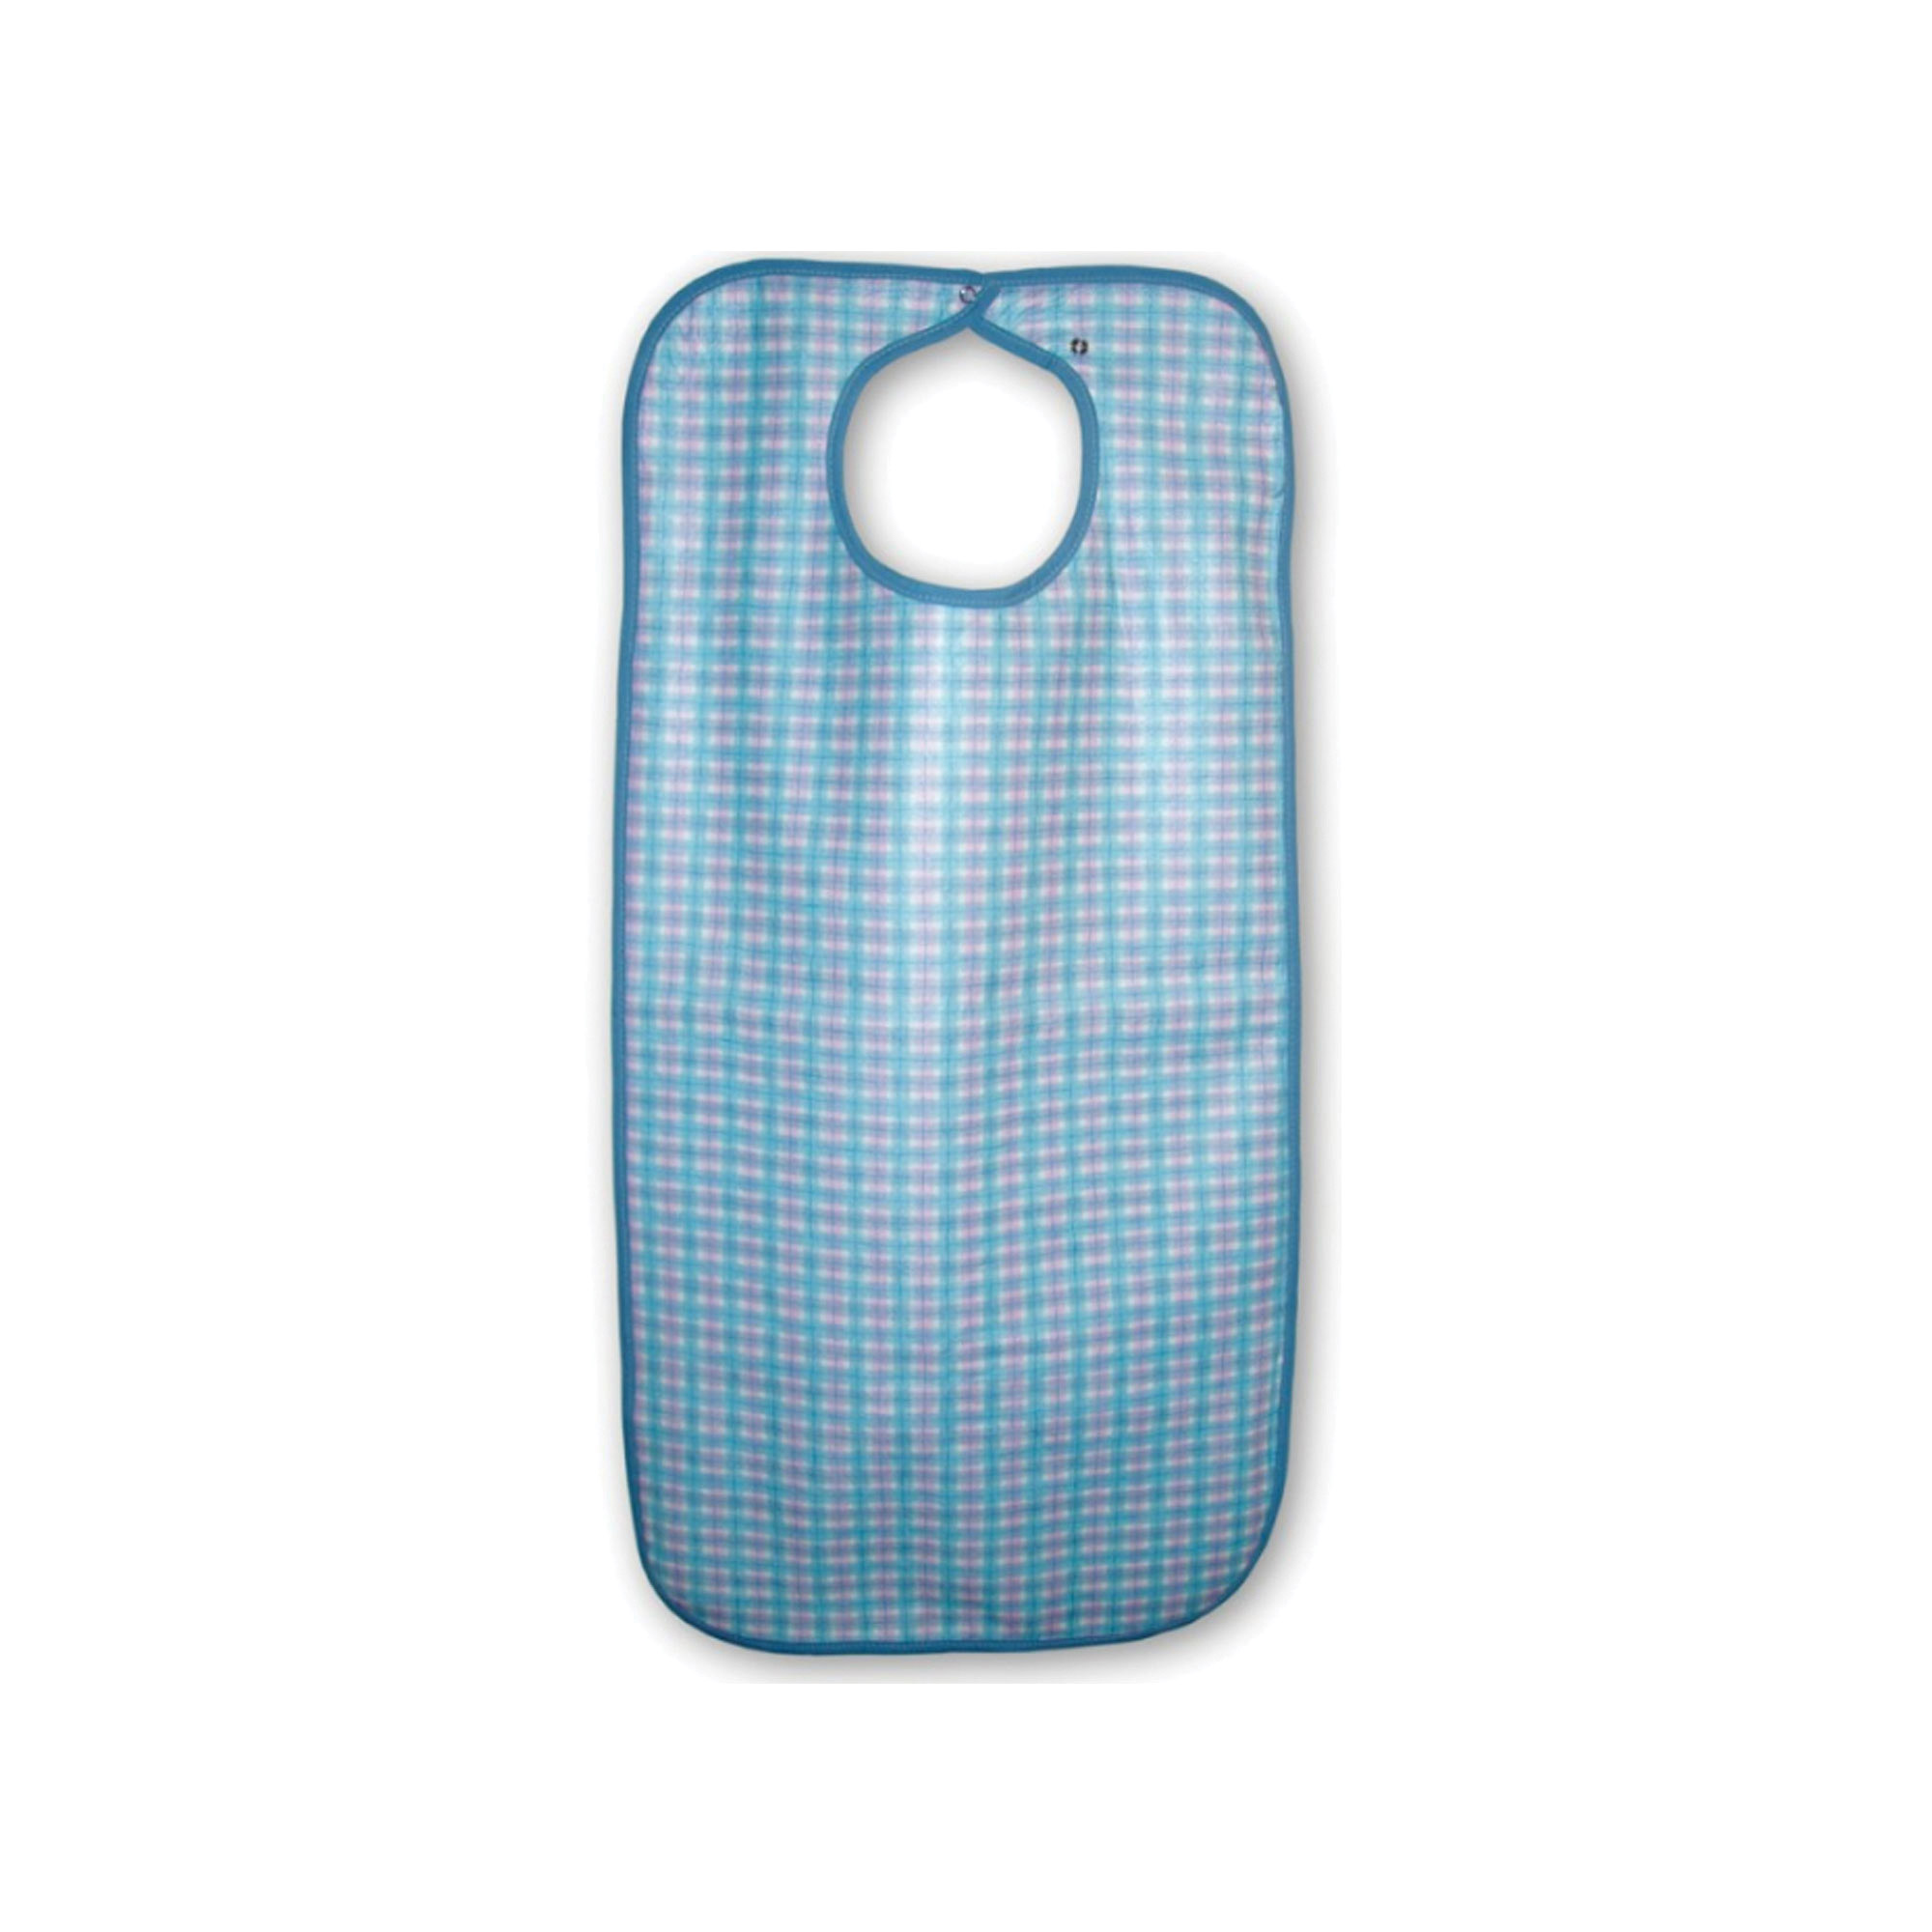 PrimaCare Gingham Clothing Protector / Adult Bib - 45 x 90cm